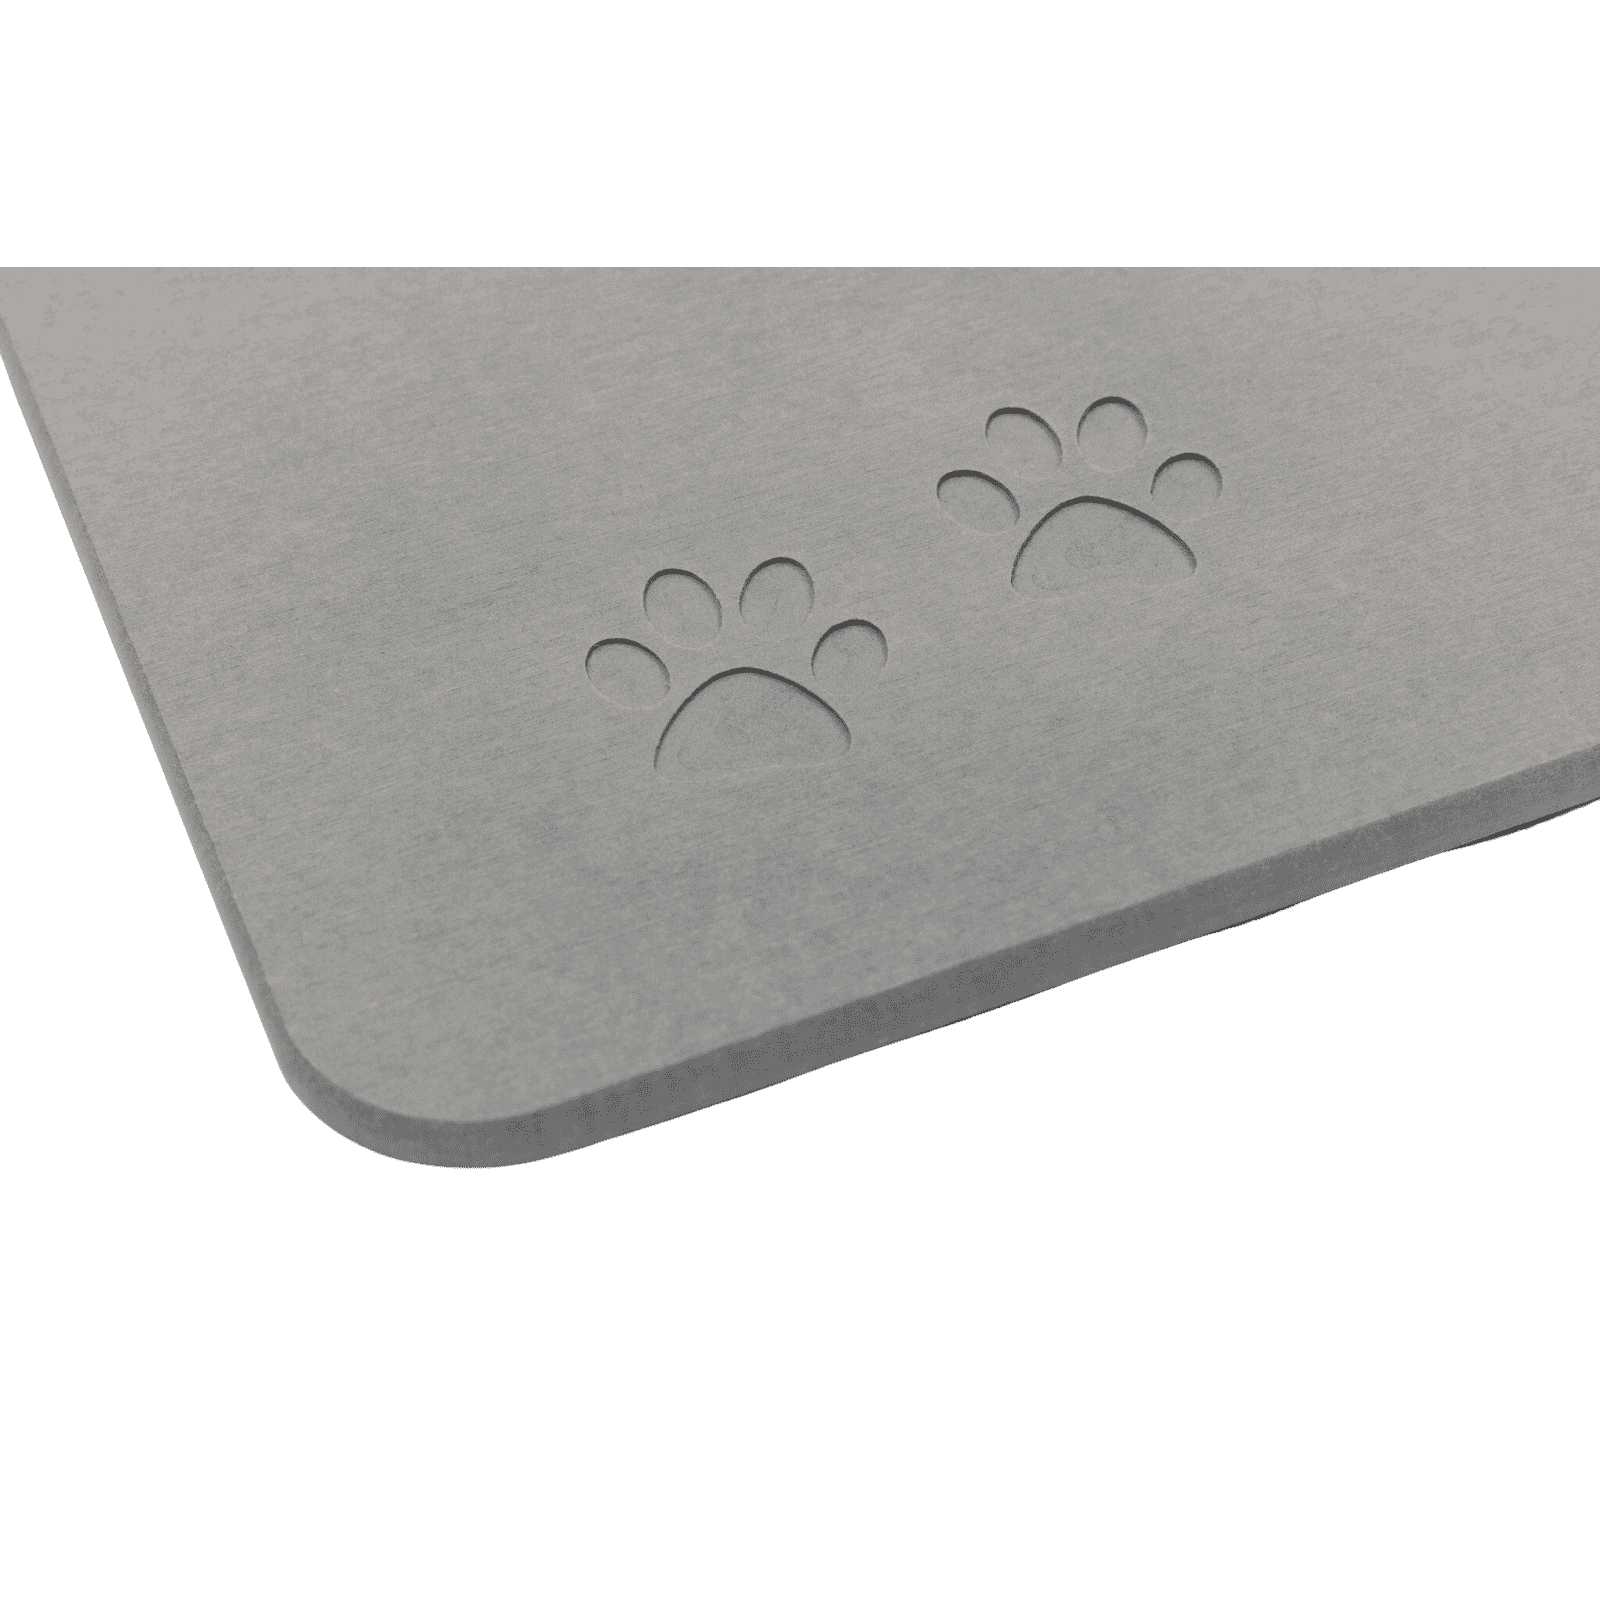 Stone Dish Drying Mats for Kitchen Counter, Diatomaceous Earth Mat Wrapped  in Silicone Webbing to Protect Dishes, Ultra Absorbent, Quick Drying